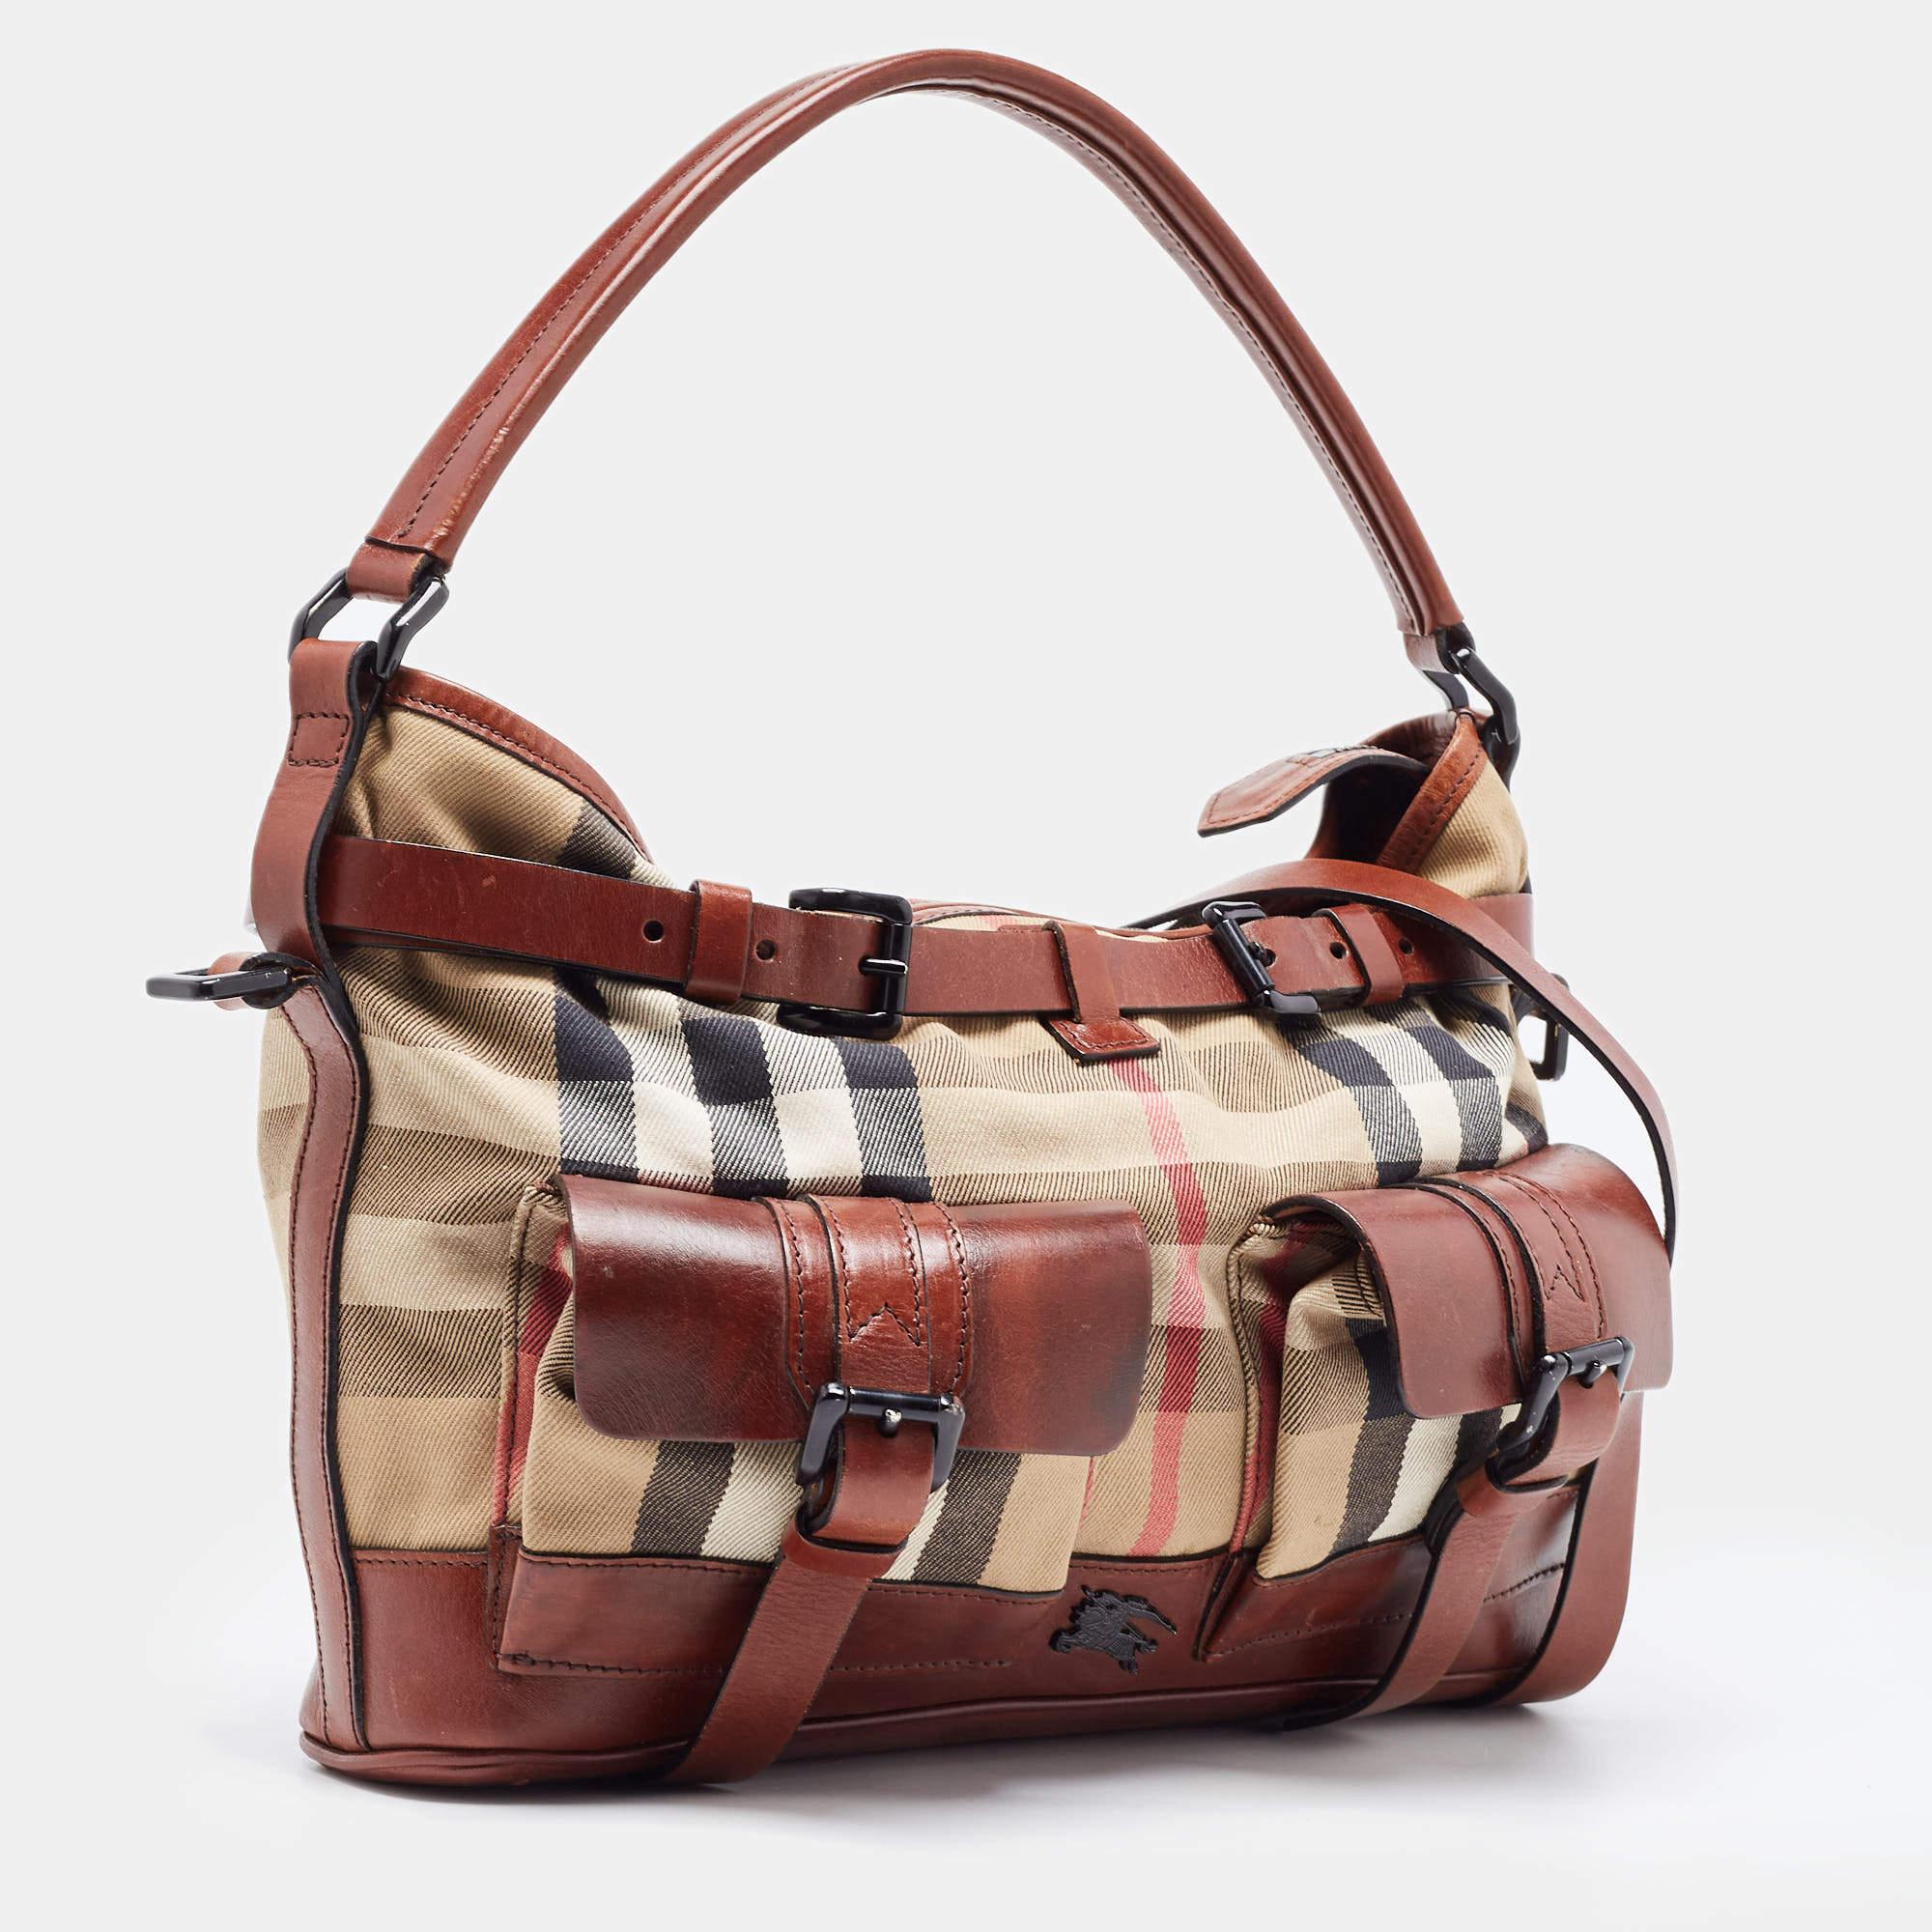 A fine handbag by Burberry that's perfect to use from workday to the weekend. Made from House Check canvas and brown leather, the hobo flaunts a single top handle, a shoulder strap, and black-tone hardware. The interior is lined with fabric and